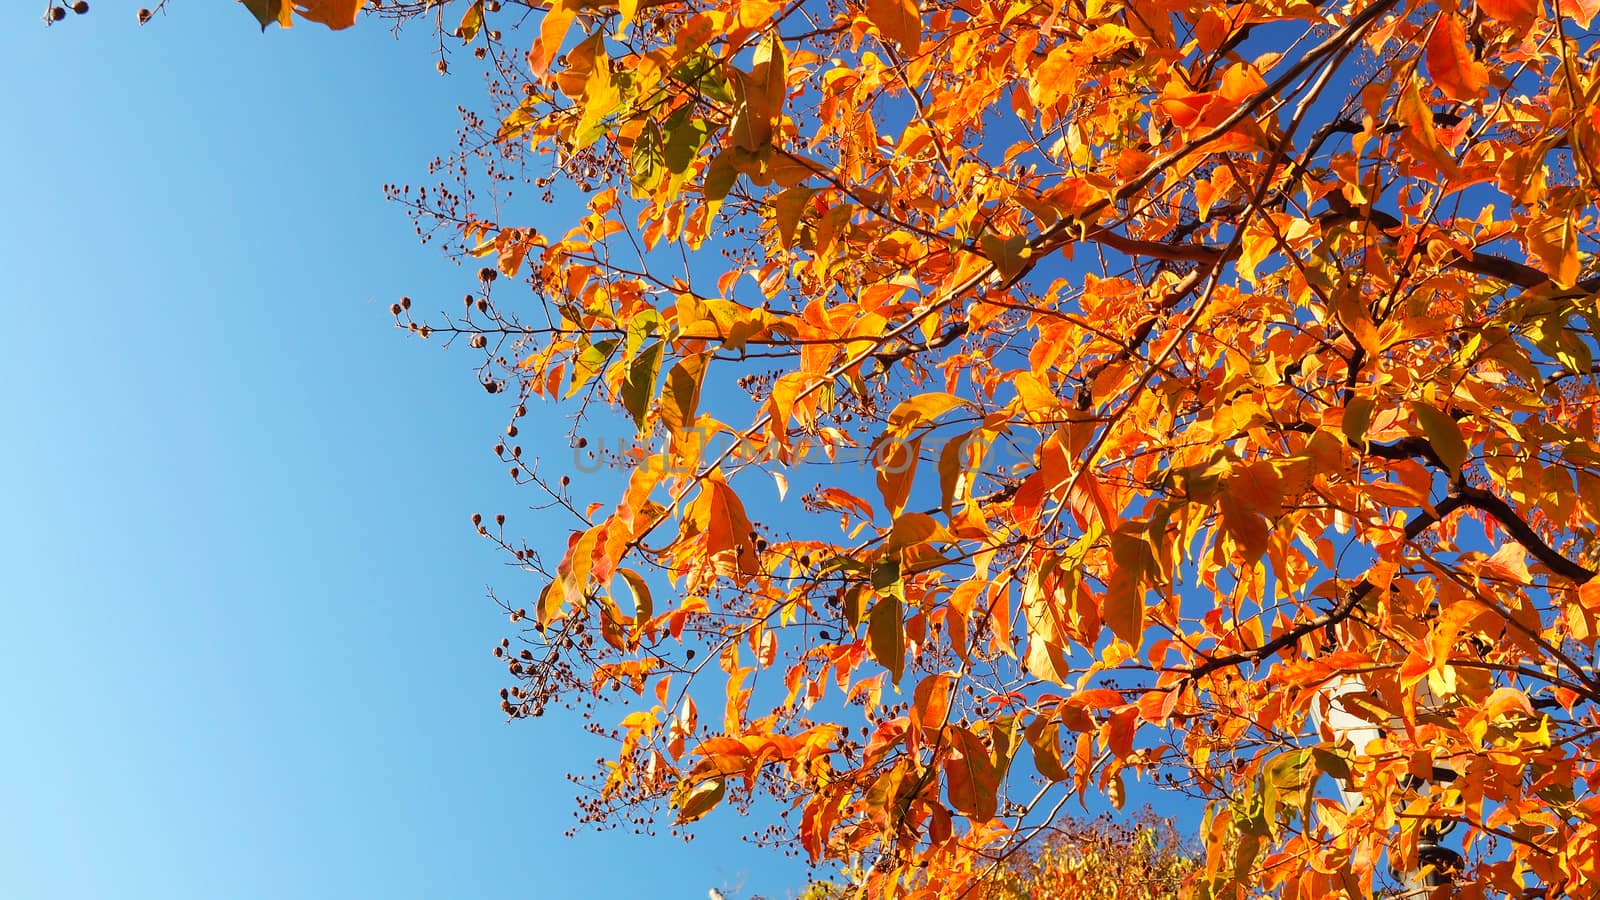 Autumn leaves and clear blue sky. by gnepphoto